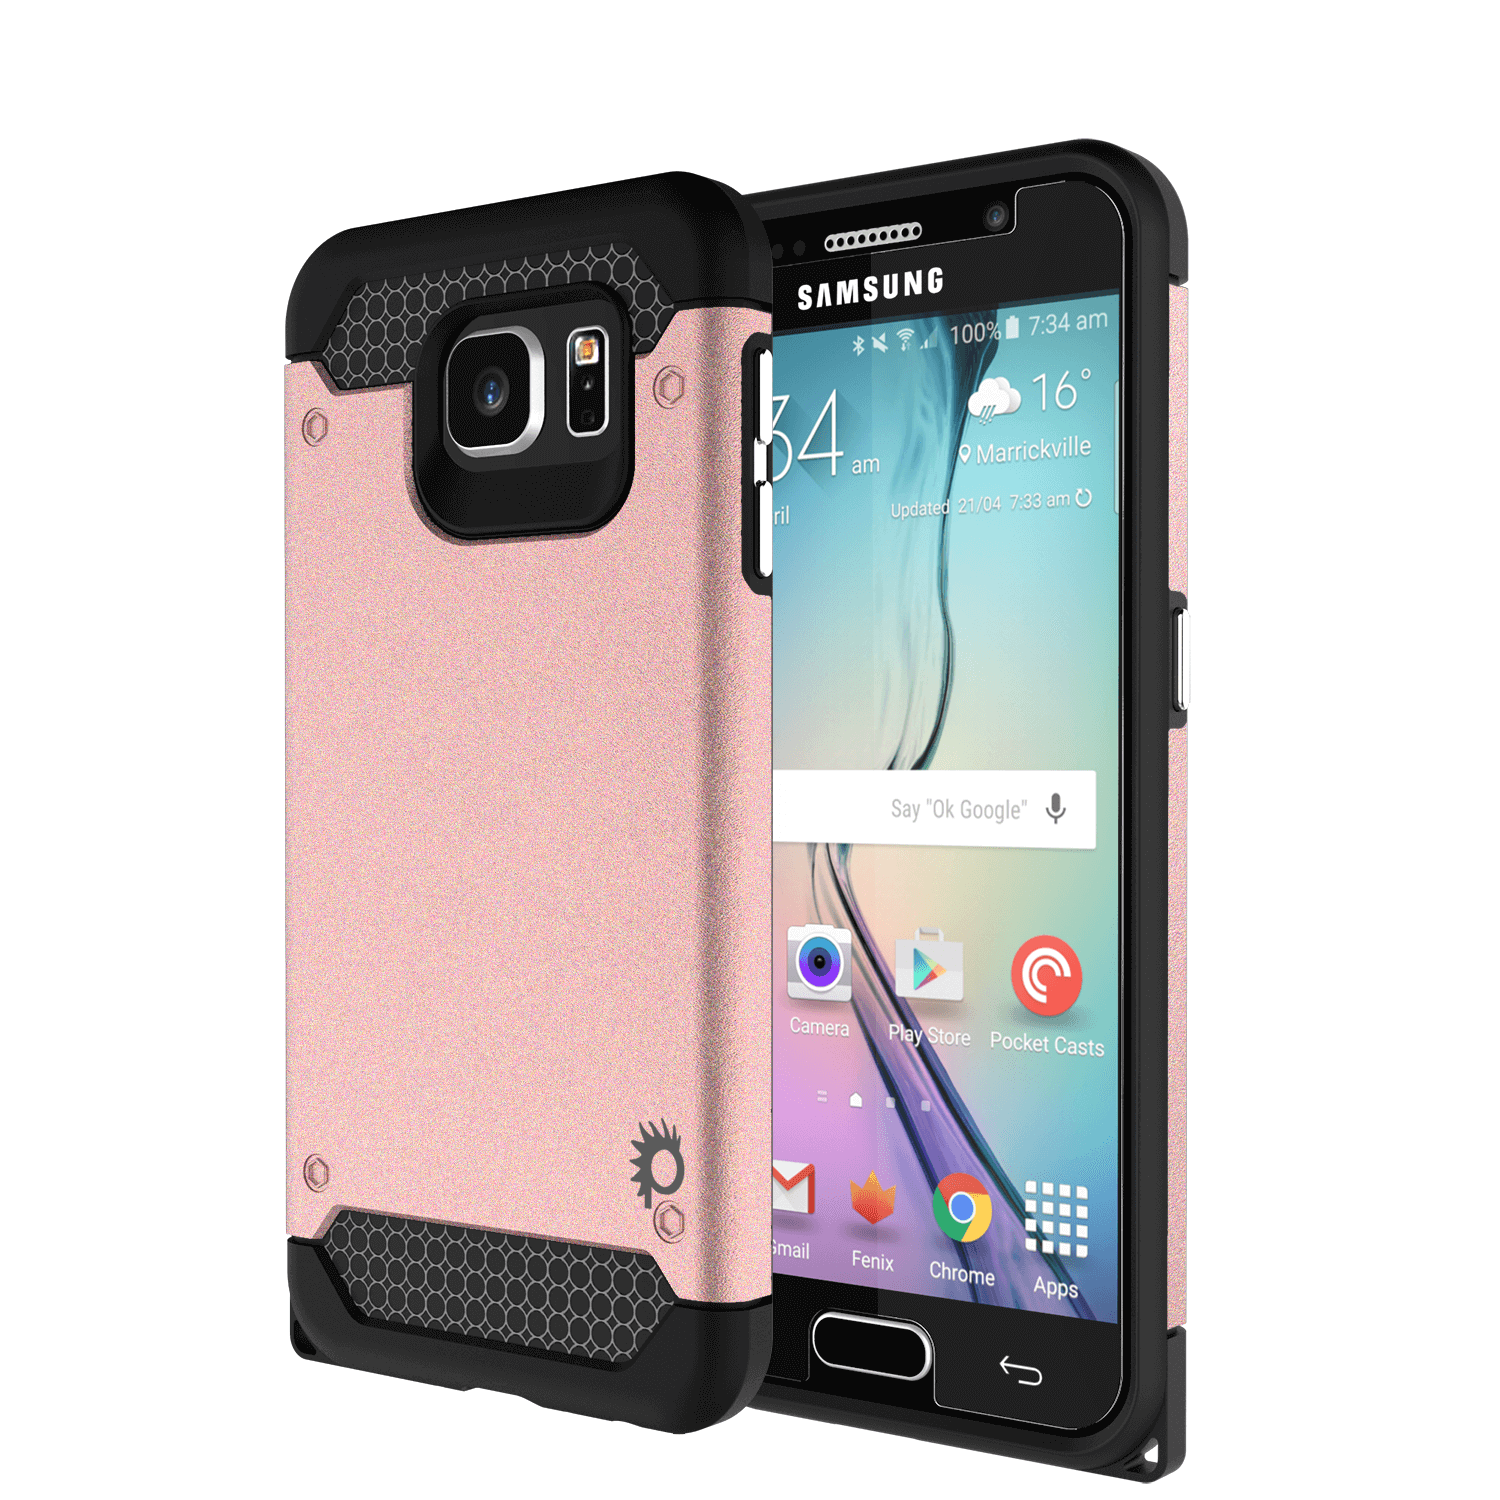 Galaxy s6 Case PunkCase Galactic Rose Gold Series Slim Armor Soft Cover Case w/ Tempered Glass